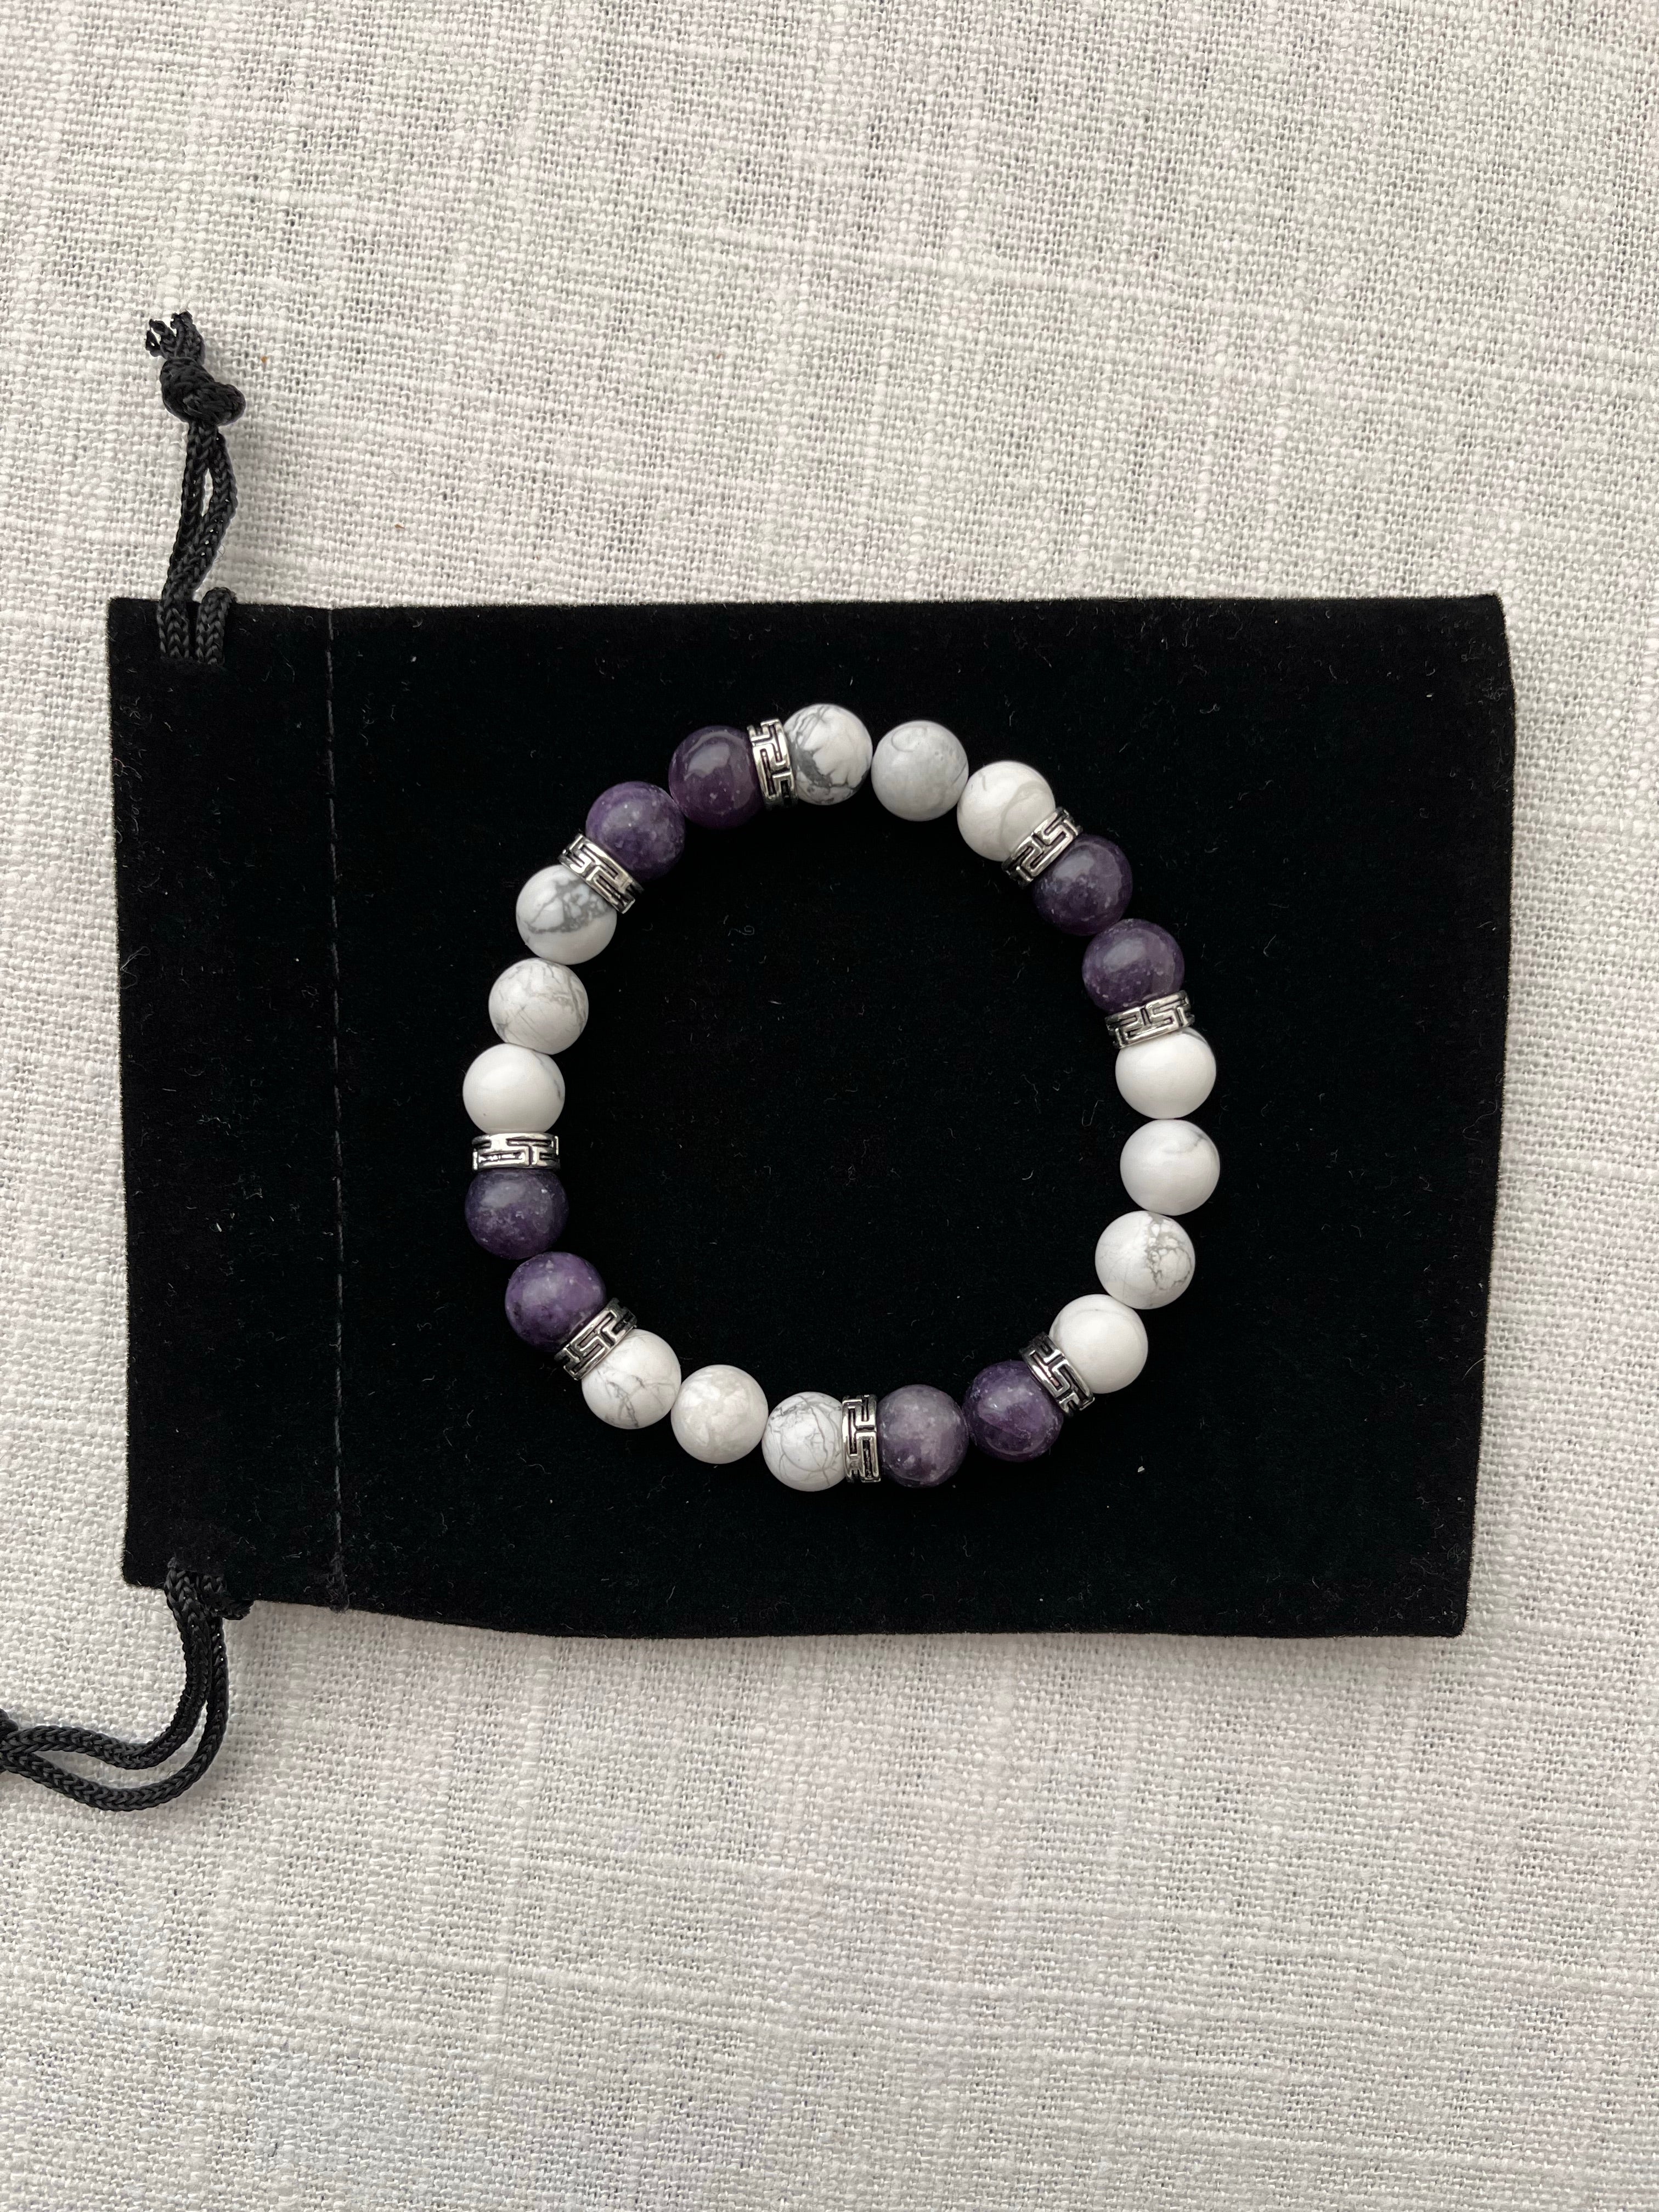 Buy High Quality Lepidolite Bracelet 8mm Crystal Beads Wearable Crystals  Crystal Jewelry Crystals for Gifts Online in India - Etsy